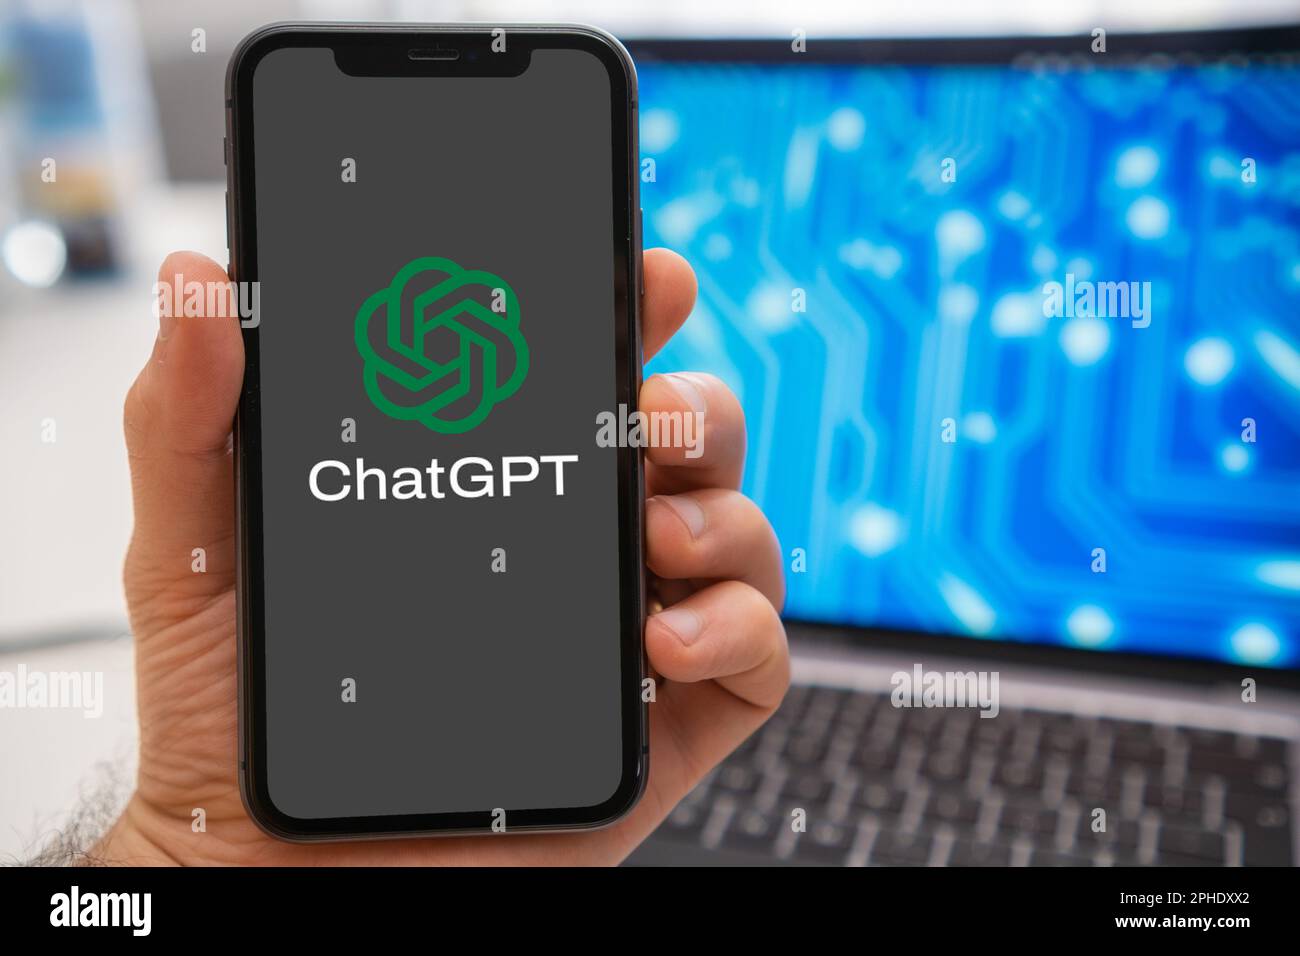 ChatGPT logo of neural network on the screen of smartphone in mans hand and laptop with neuronet on the splash screen on the background. Artificial intelligence concept. March 2023, Prague, Czech Republic  Stock Photo